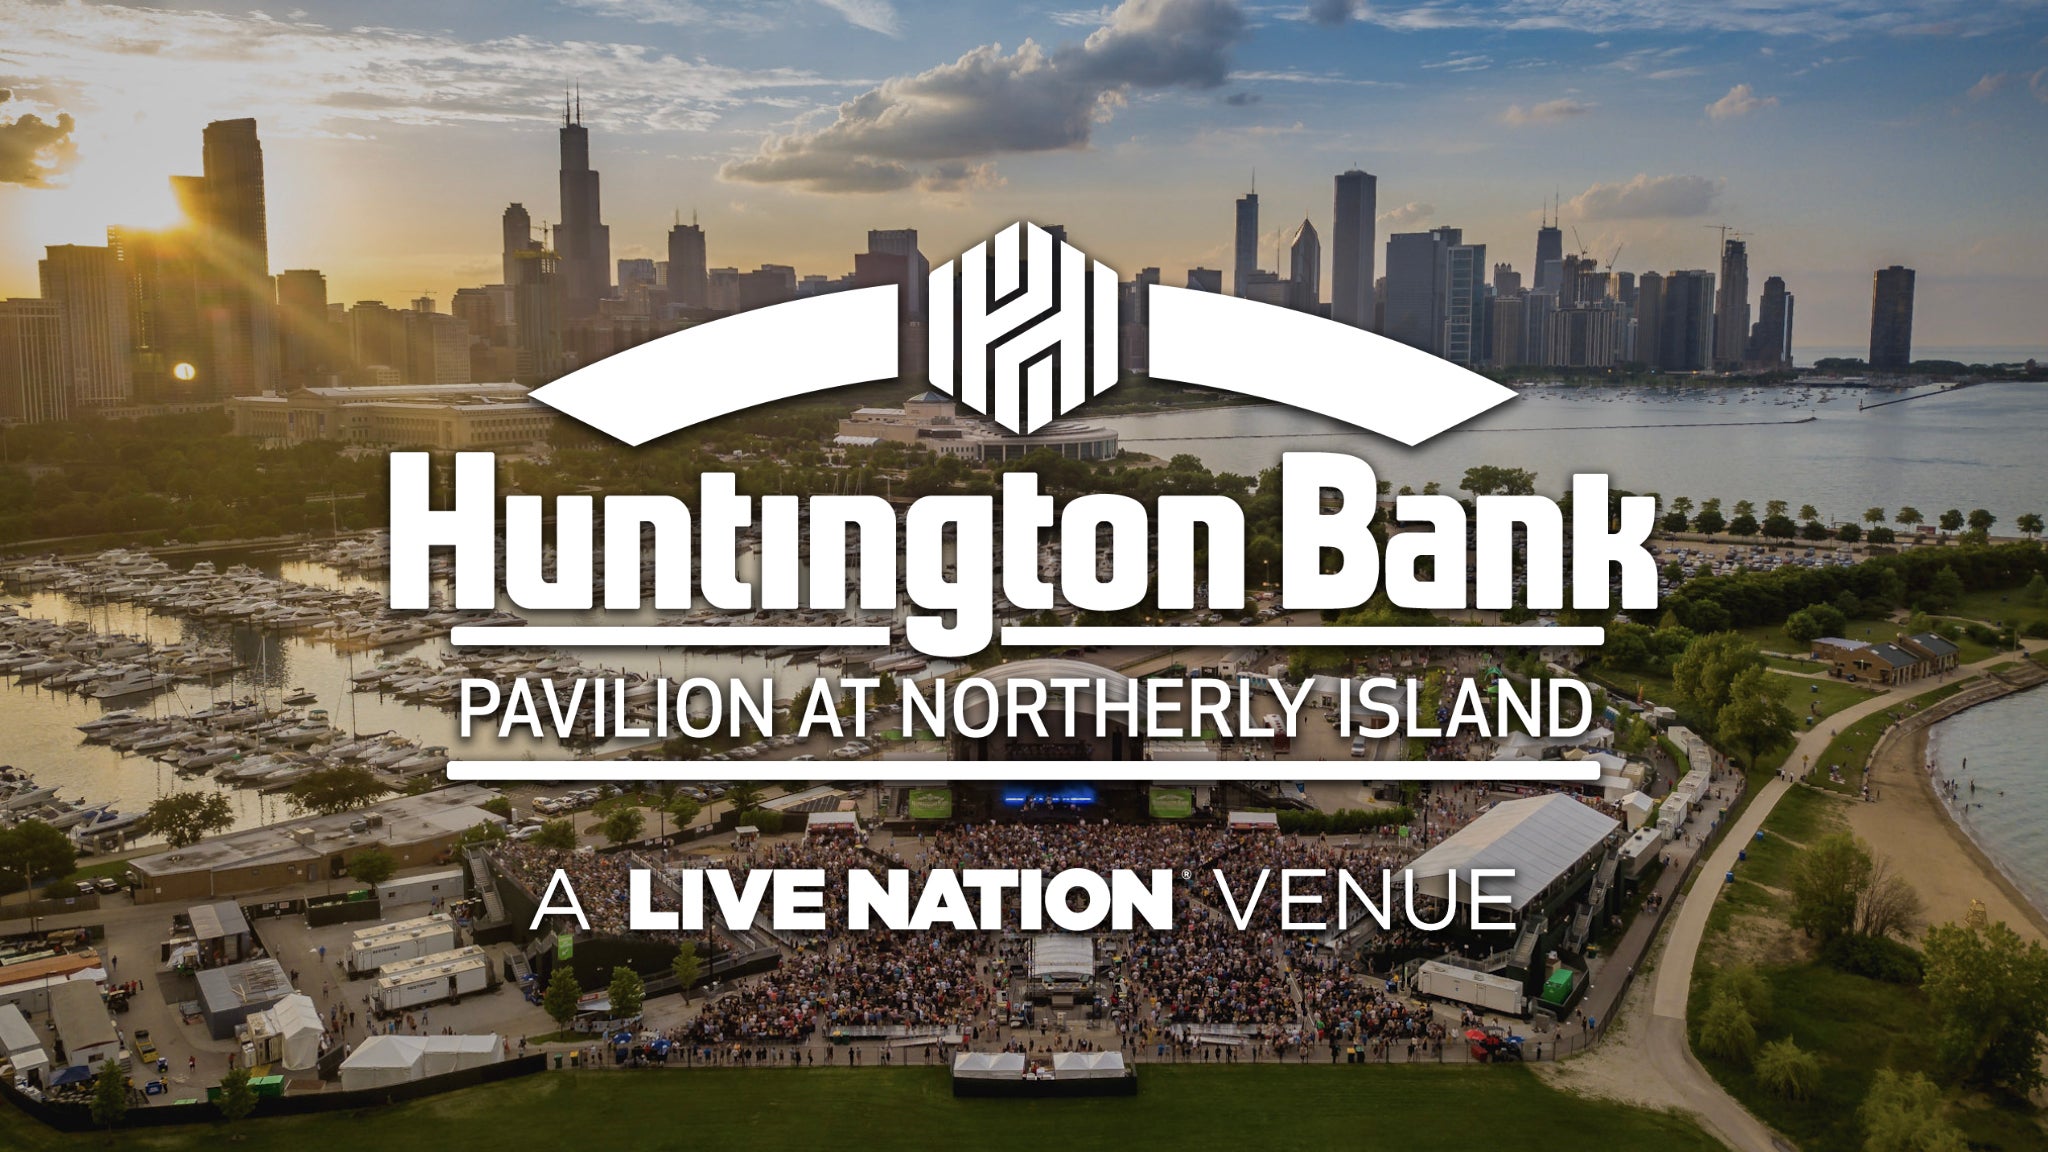 Huntington Bank Pavilion at Northerly Island 2021 show schedule